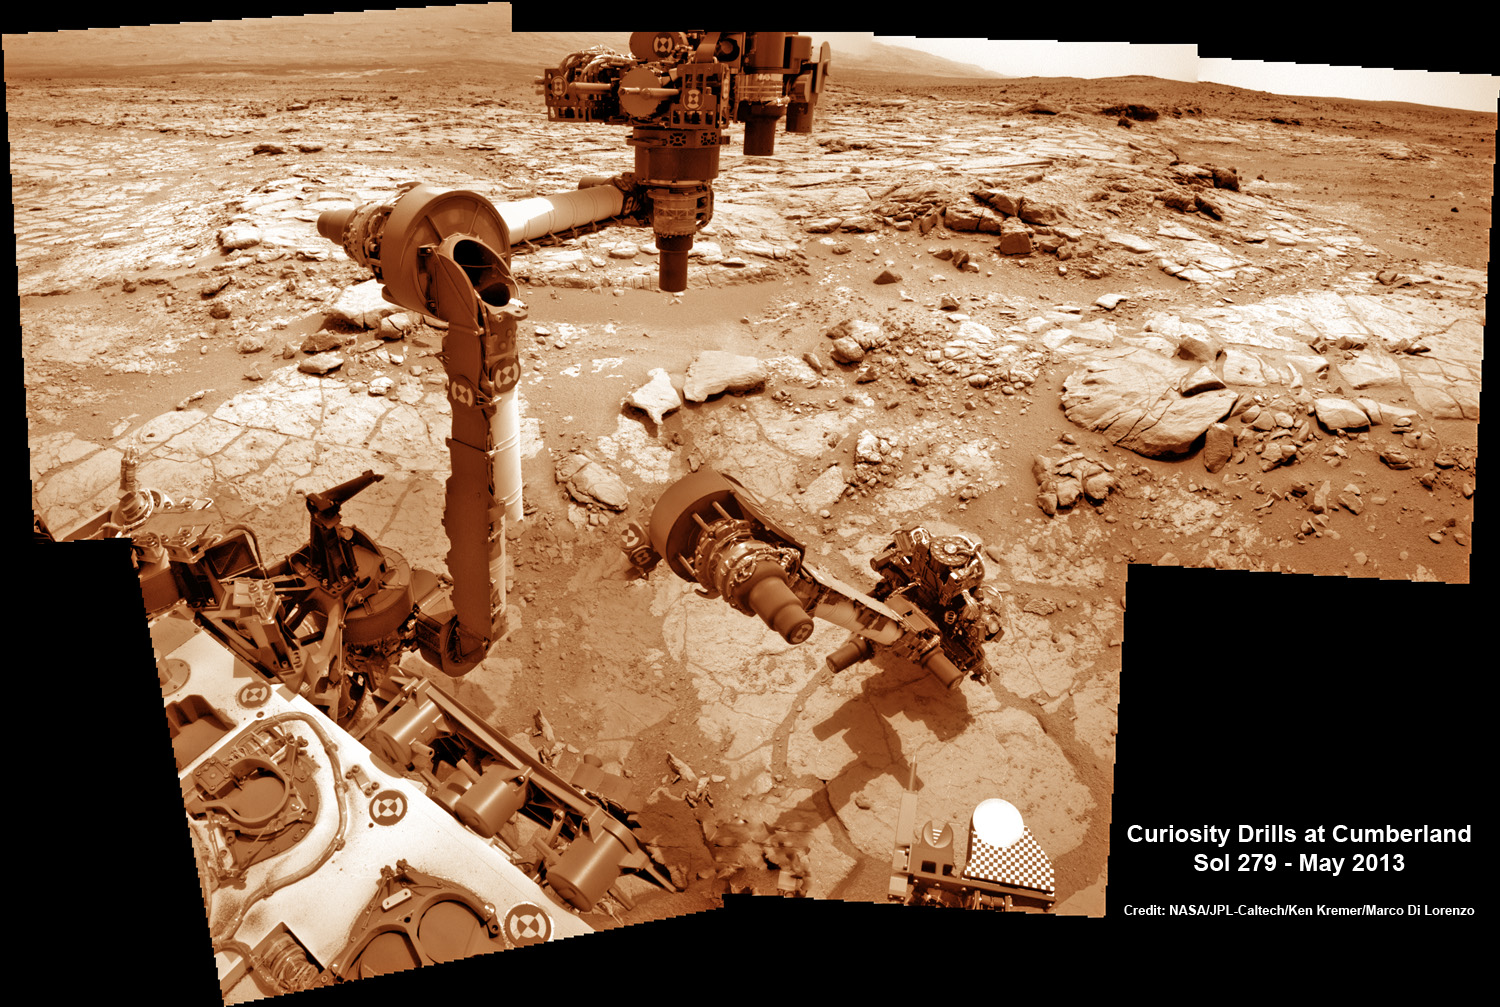 This time lapse mosaic shows Curiosity maneuvering the robotic arm to drill into her 2nd rock target named “Cumberland” to collect powdery Martian material on May 19, 2013 (Sol 279) for analysis by her onboard chemistry labs; SAM & Chemin. The photo mosaic was stitched from raw images captured by the navcam cameras on May 14 & May 19 (Sols 274 & 279). Credit: NASA/JPL-Caltech/Ken Kremer/Marco Di Lorenzo